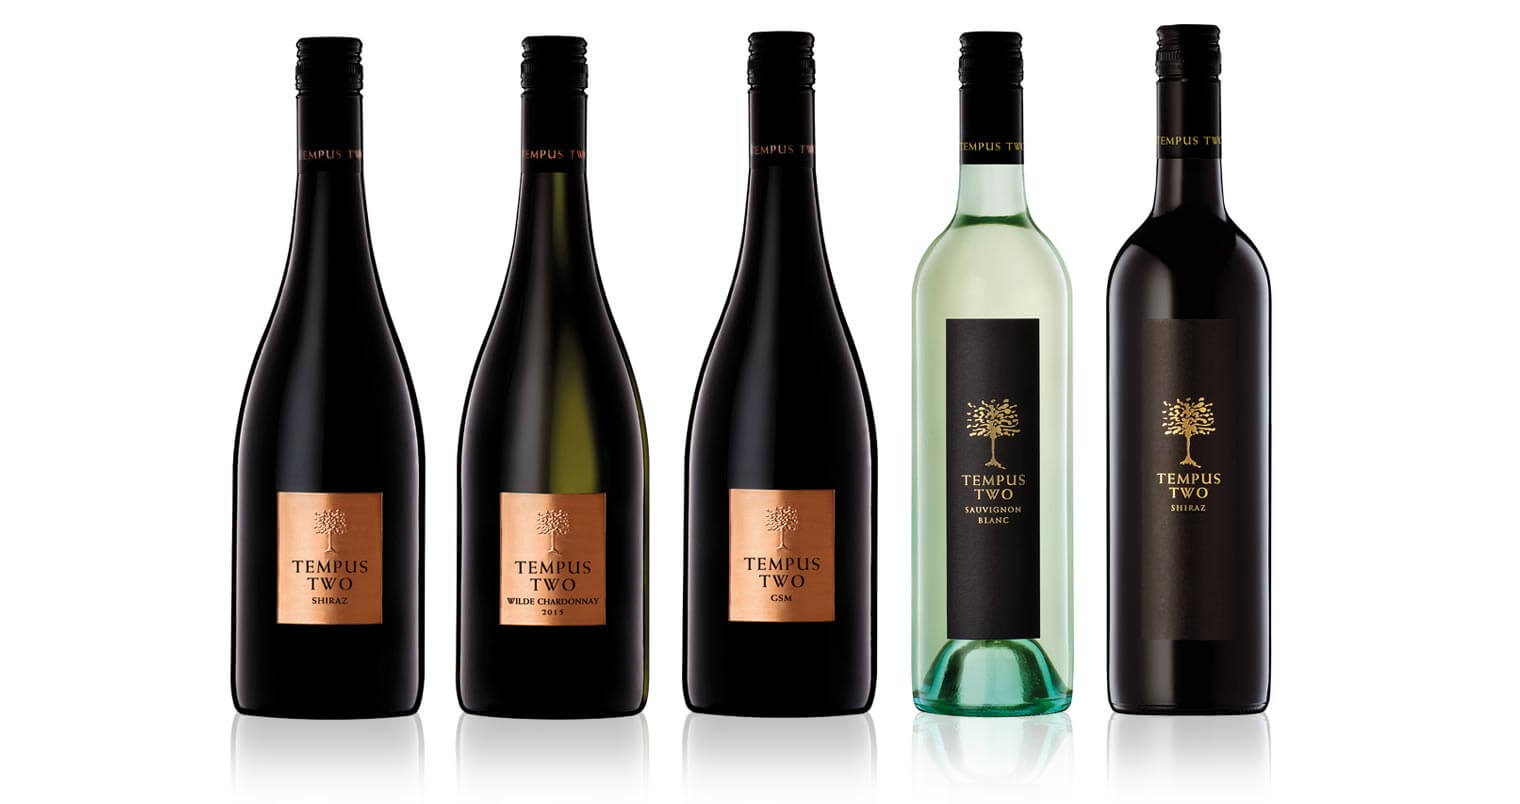 Palm Bay International Adds Tempus Two Fine Wines From Australia to Portfolio, featured image